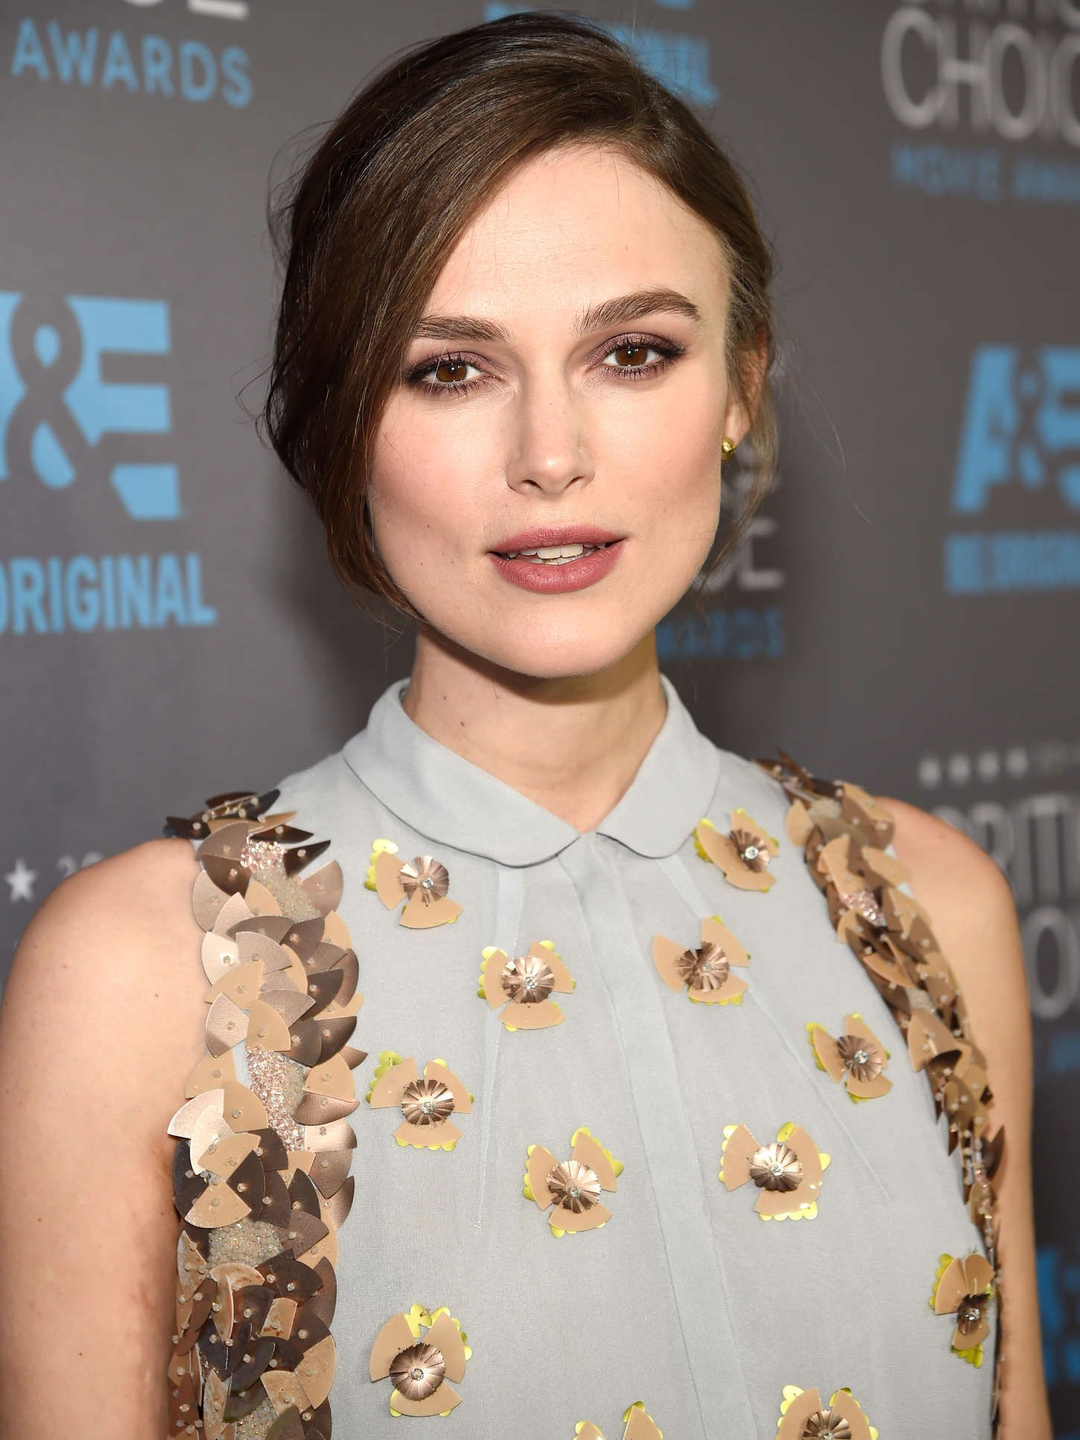 Keira Knightley who is her mother